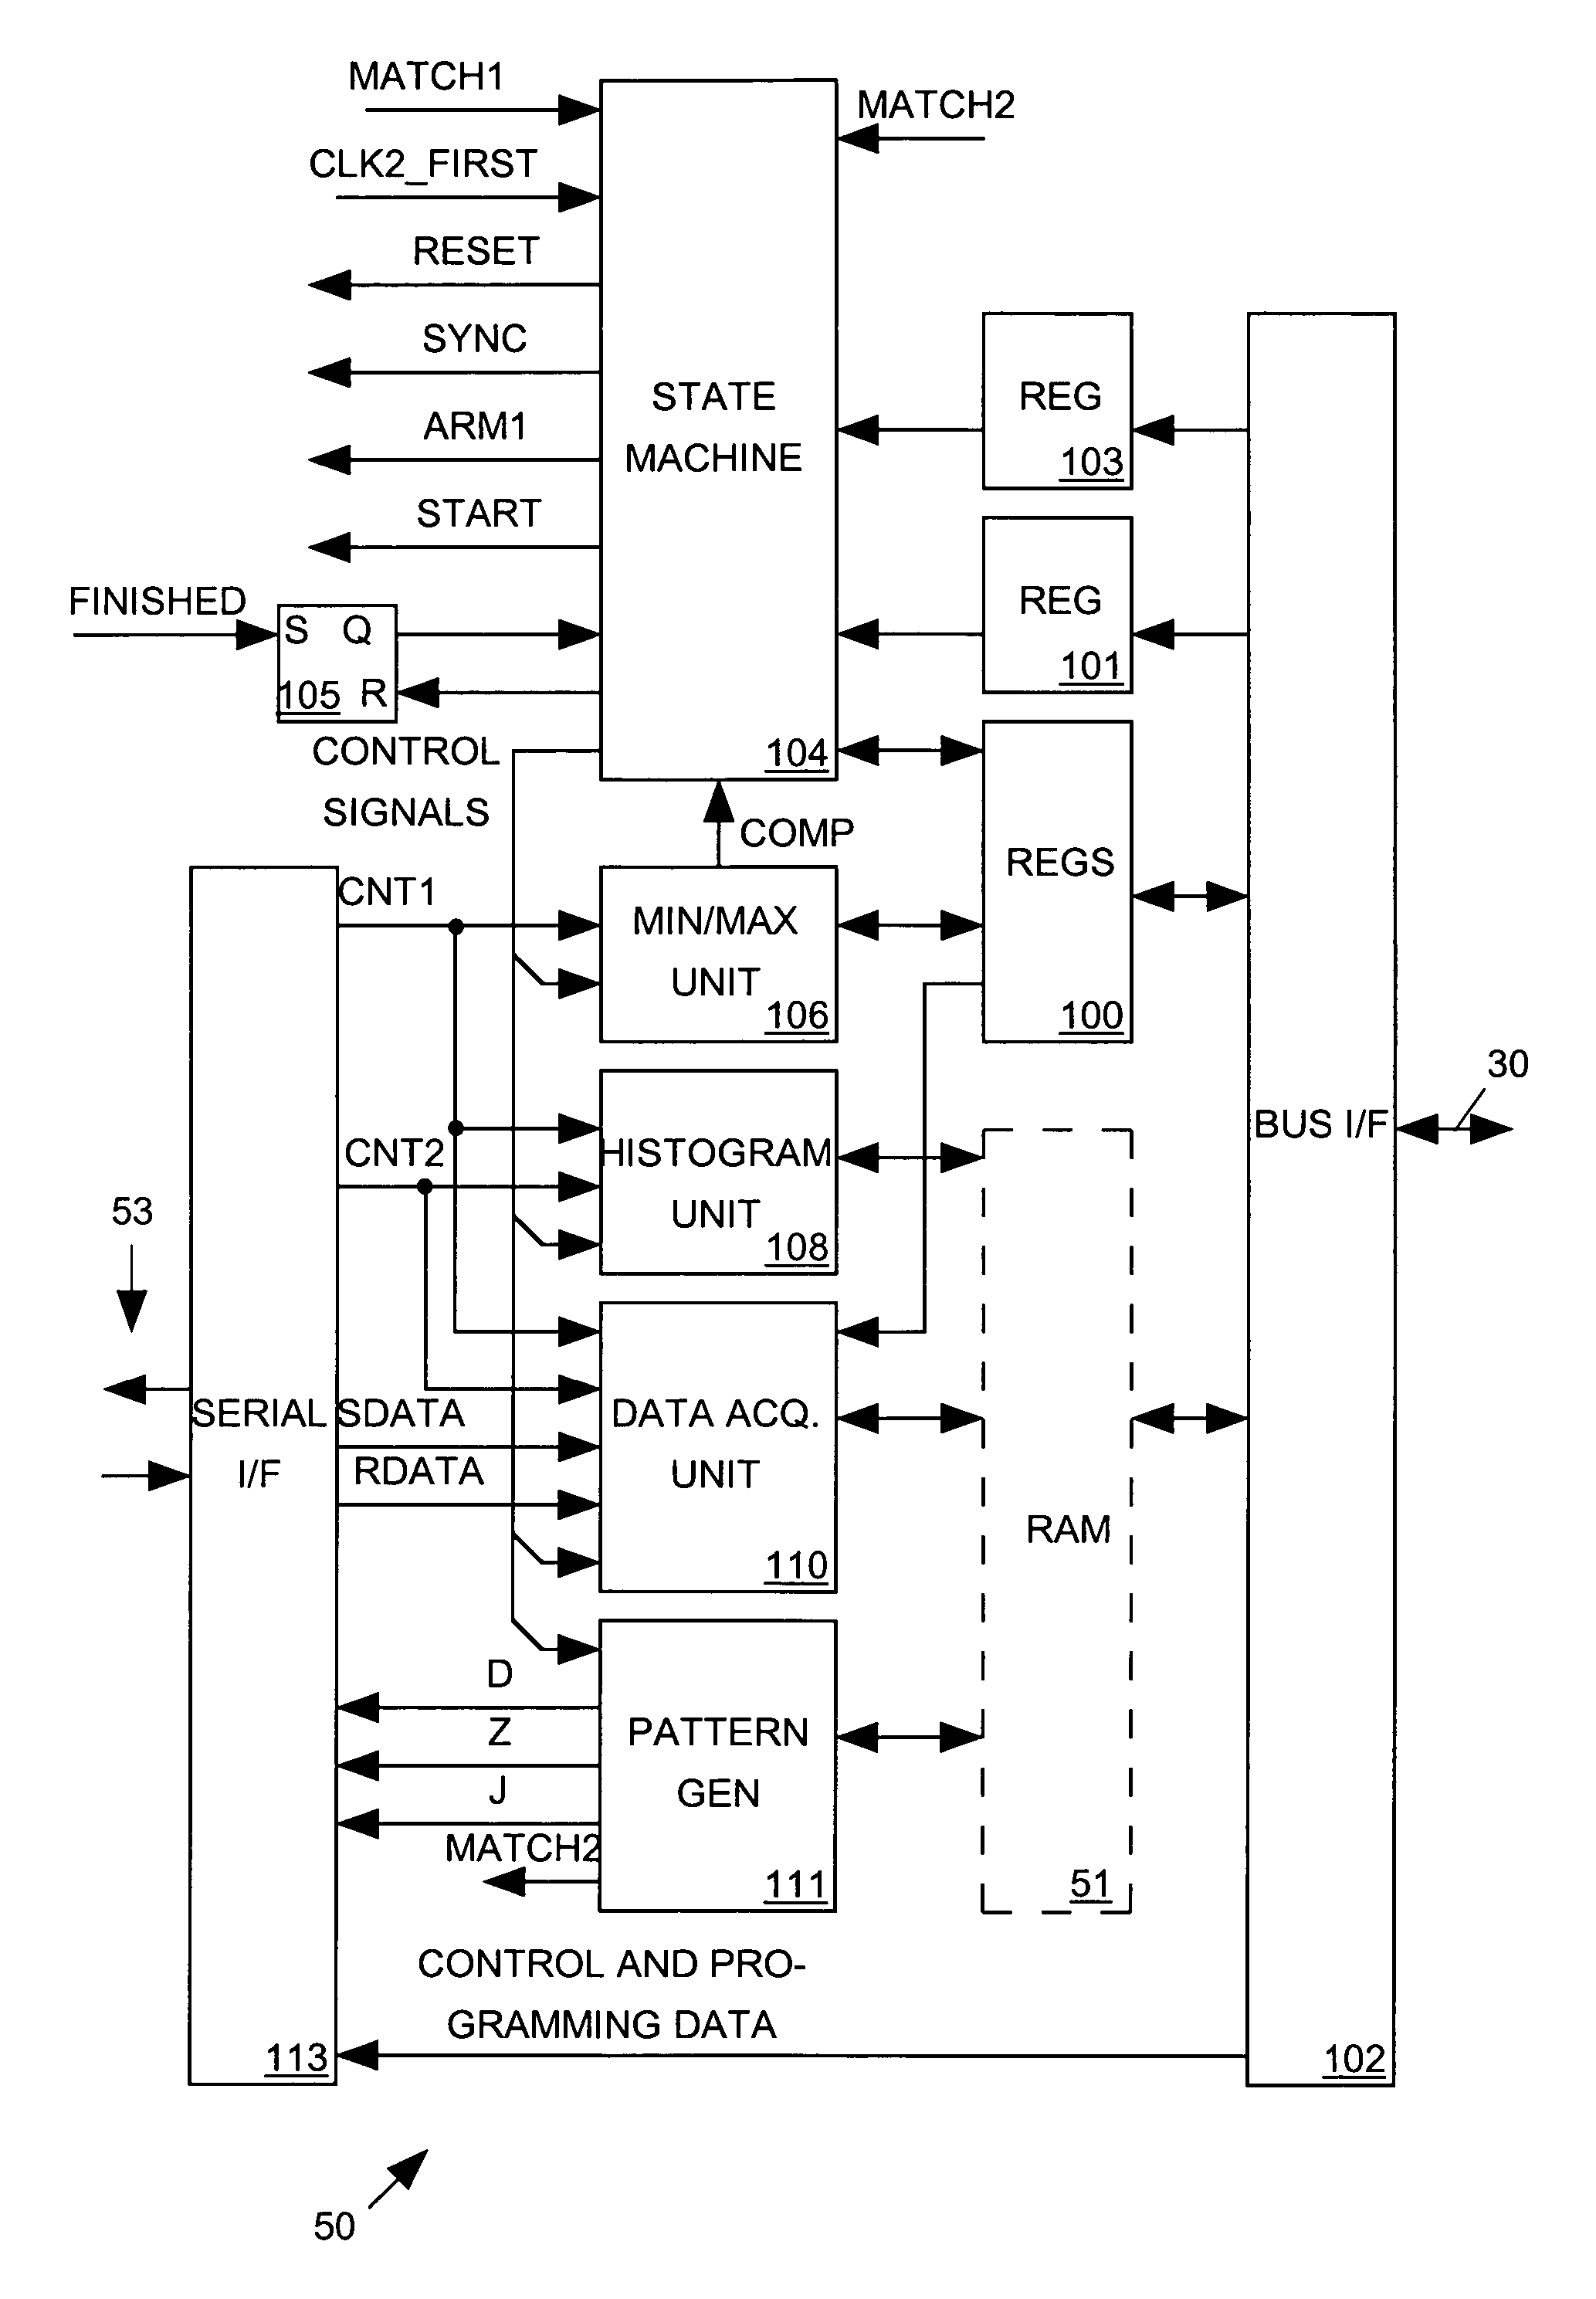 System for measuring characteristics of a digital signal